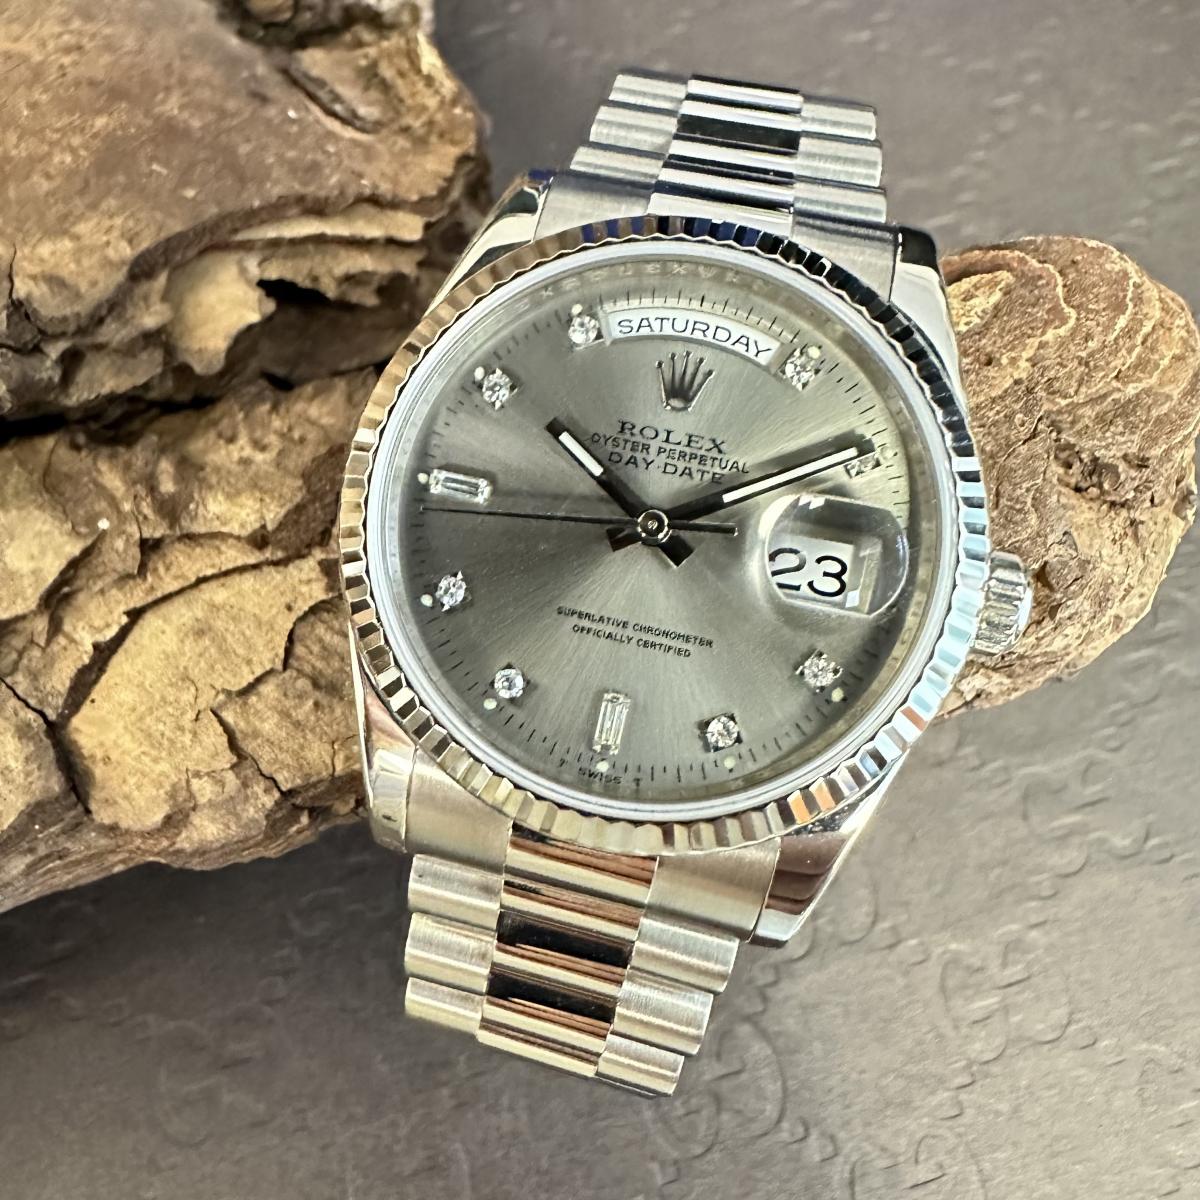 Rolex Oyster Perpetual Day-Date 36 Diamonds - Ref. 118239 - FULL-SET 2013